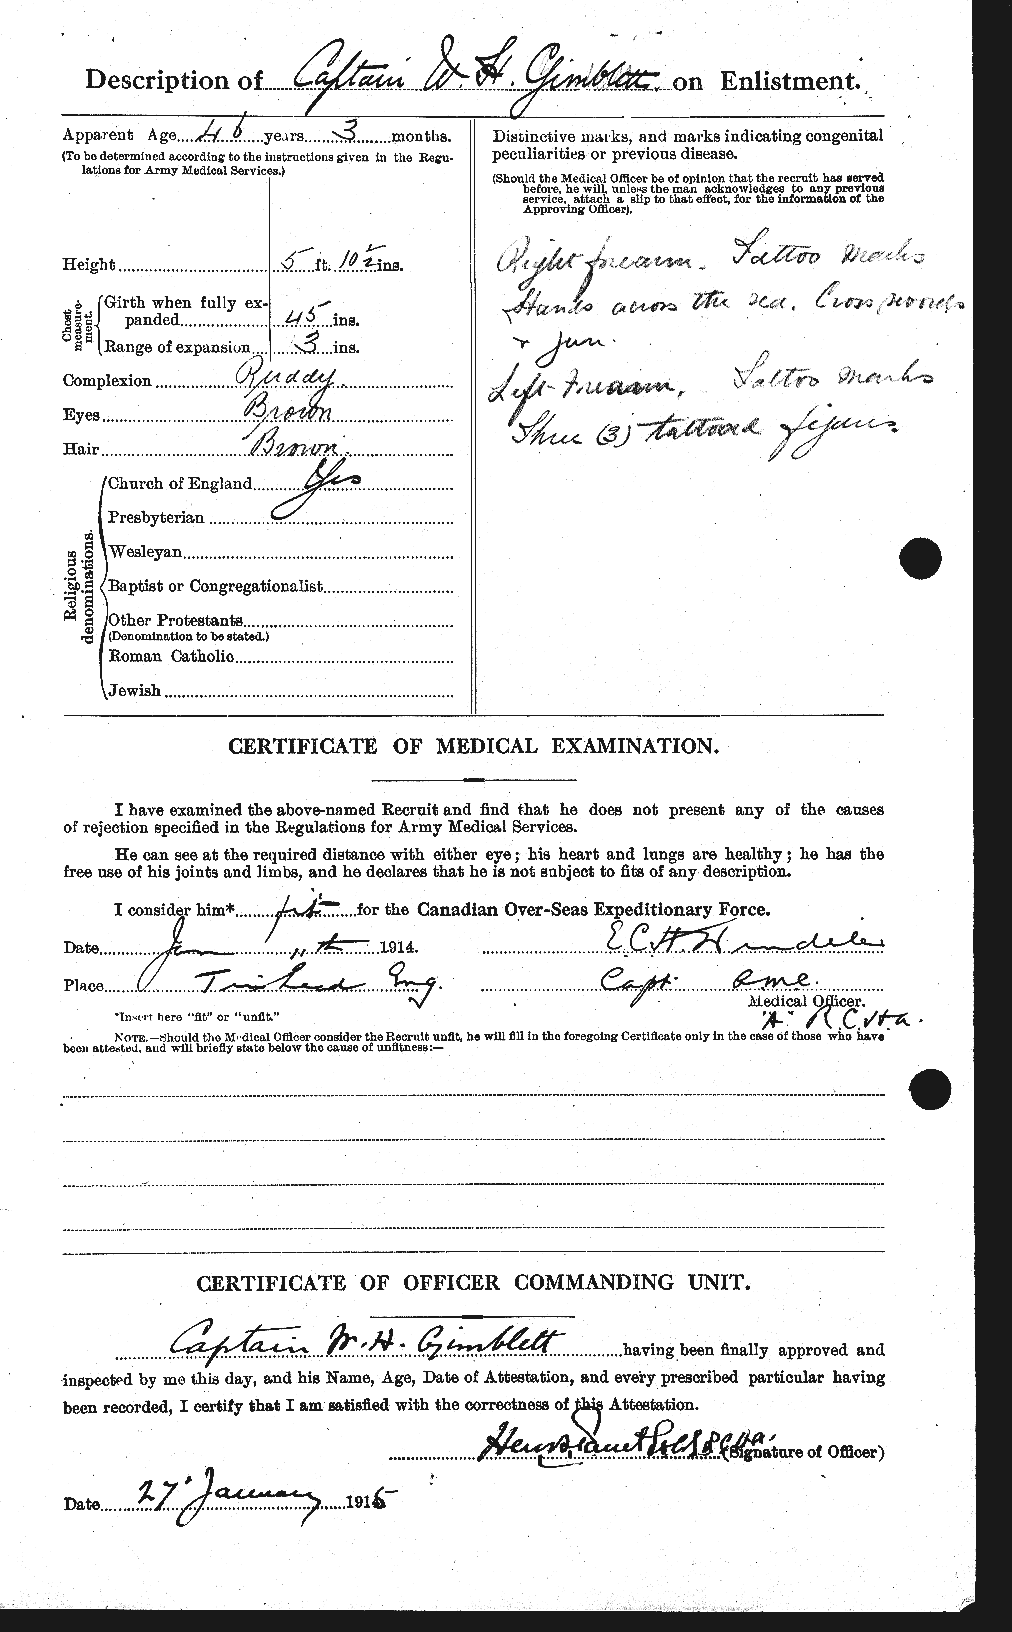 Personnel Records of the First World War - CEF 351156b